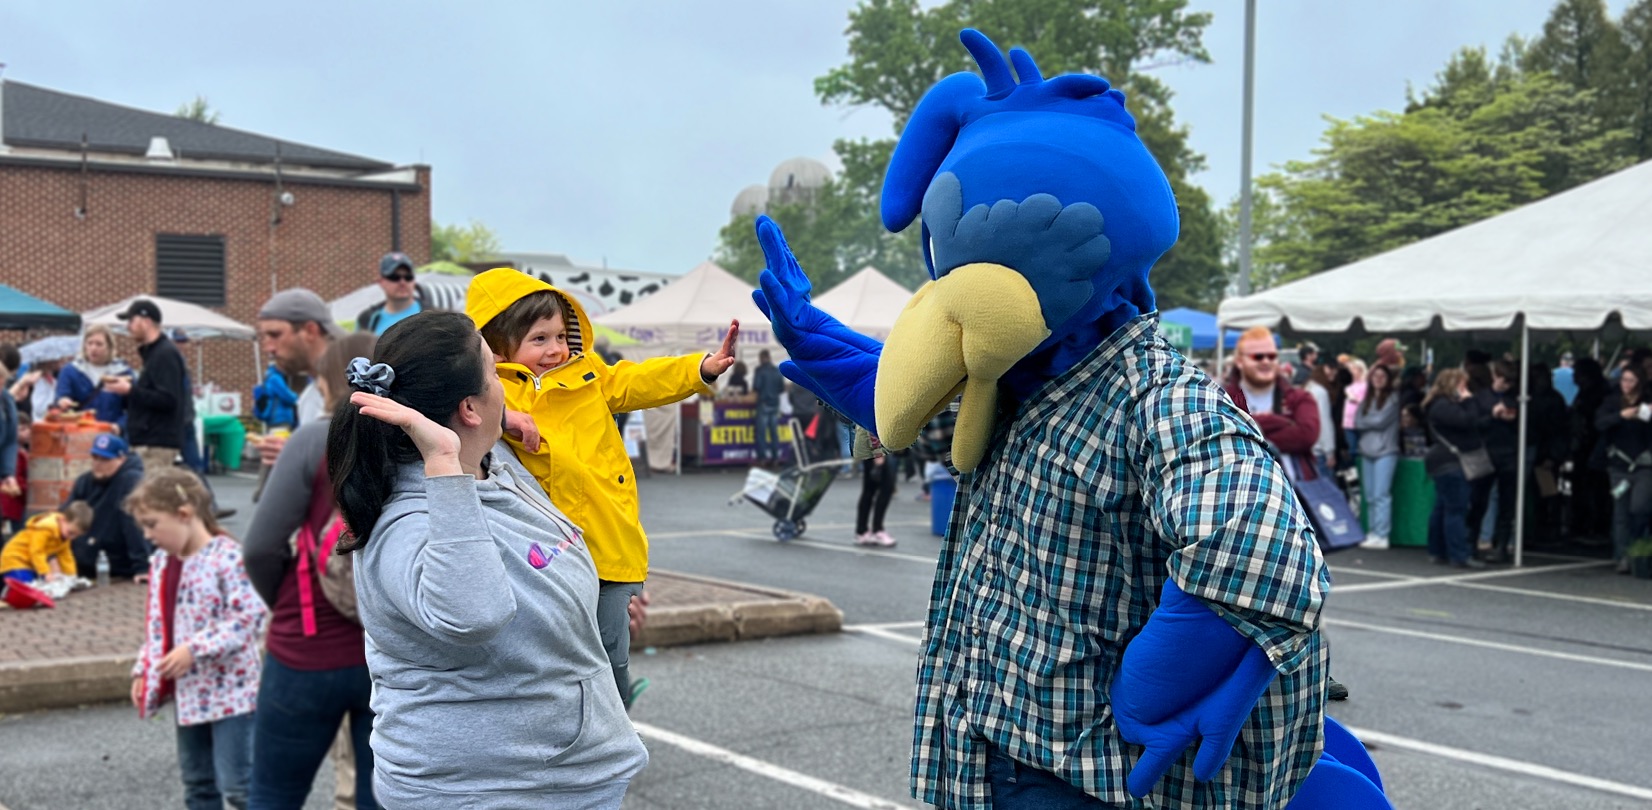 A boy high-fiving the UD mascot.